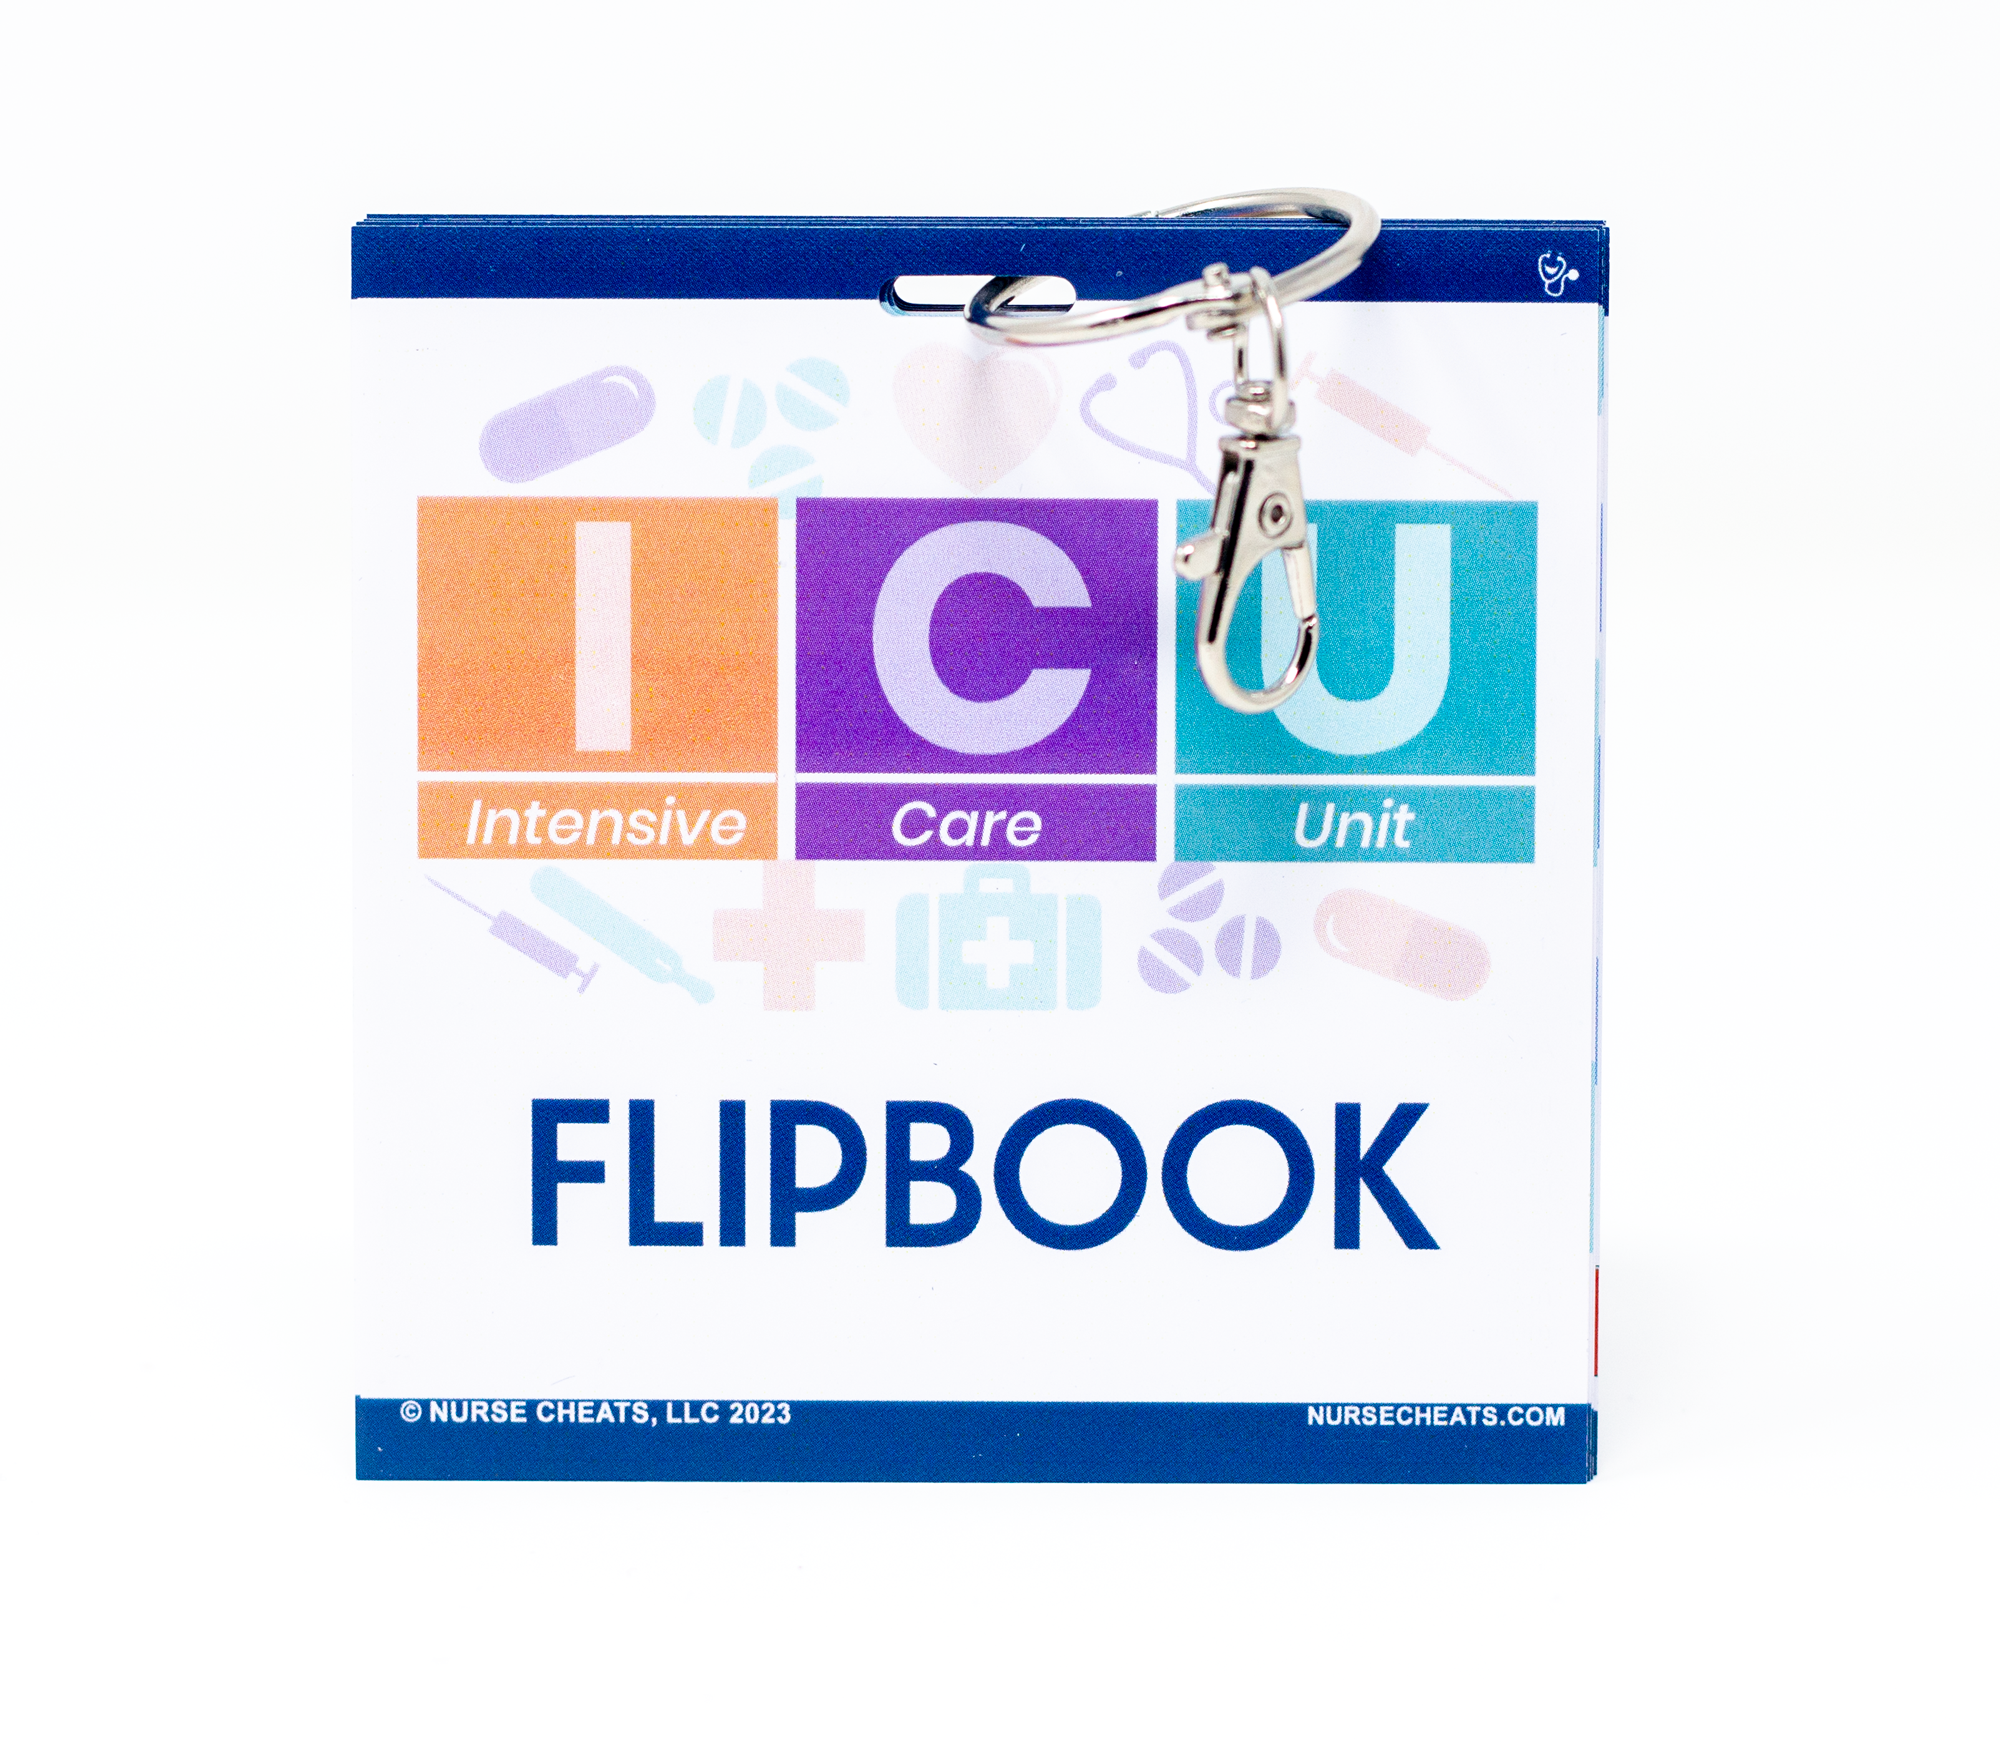 This badge buddy book contains comprehensive information about the ICU.  It is perfect for ICU nurses, new nurses and critical care.